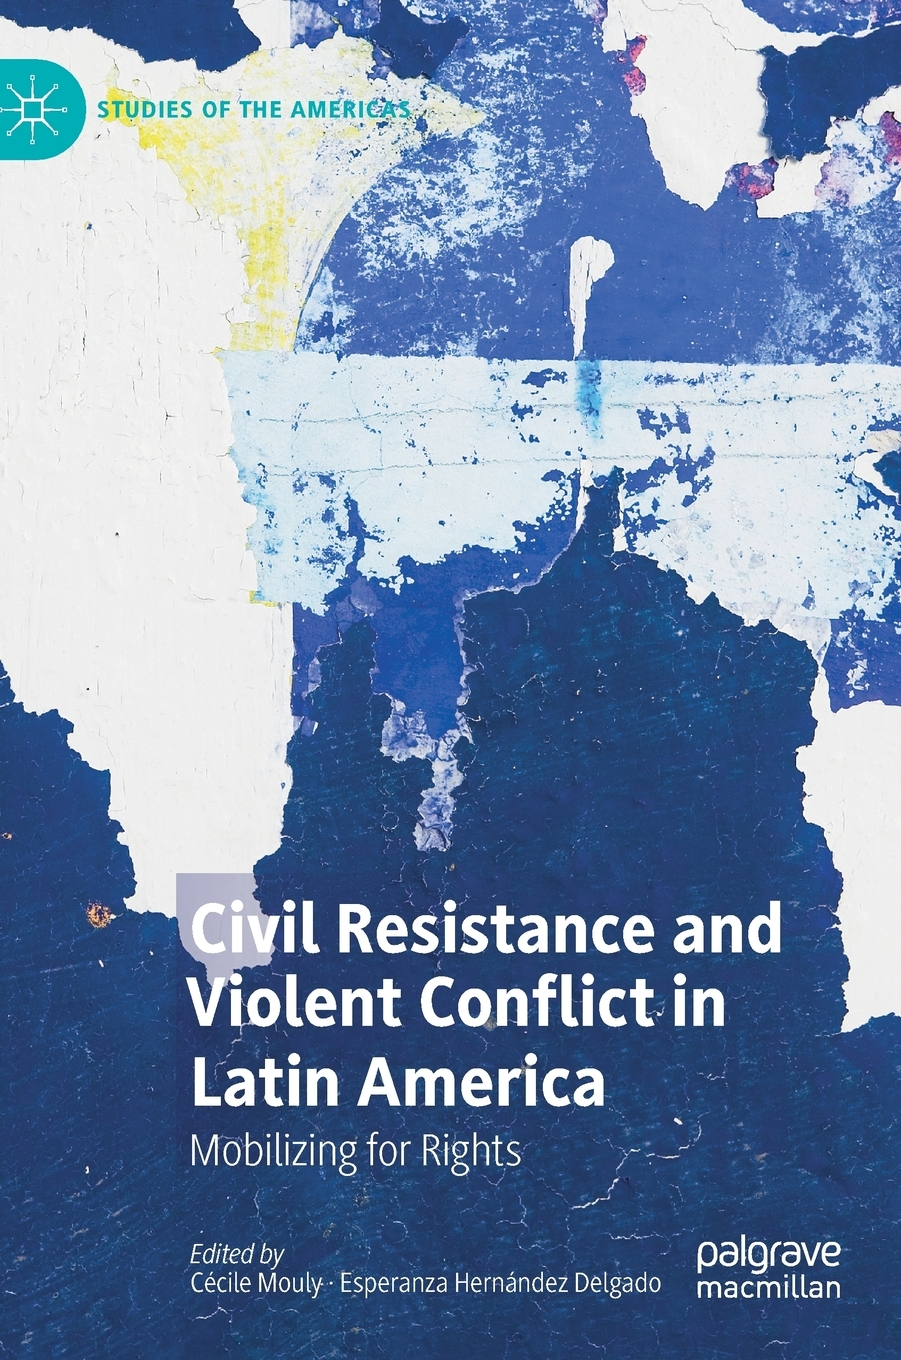 Civil Resistance and Violent Conflict in Latin America: Mobilizing for Rights